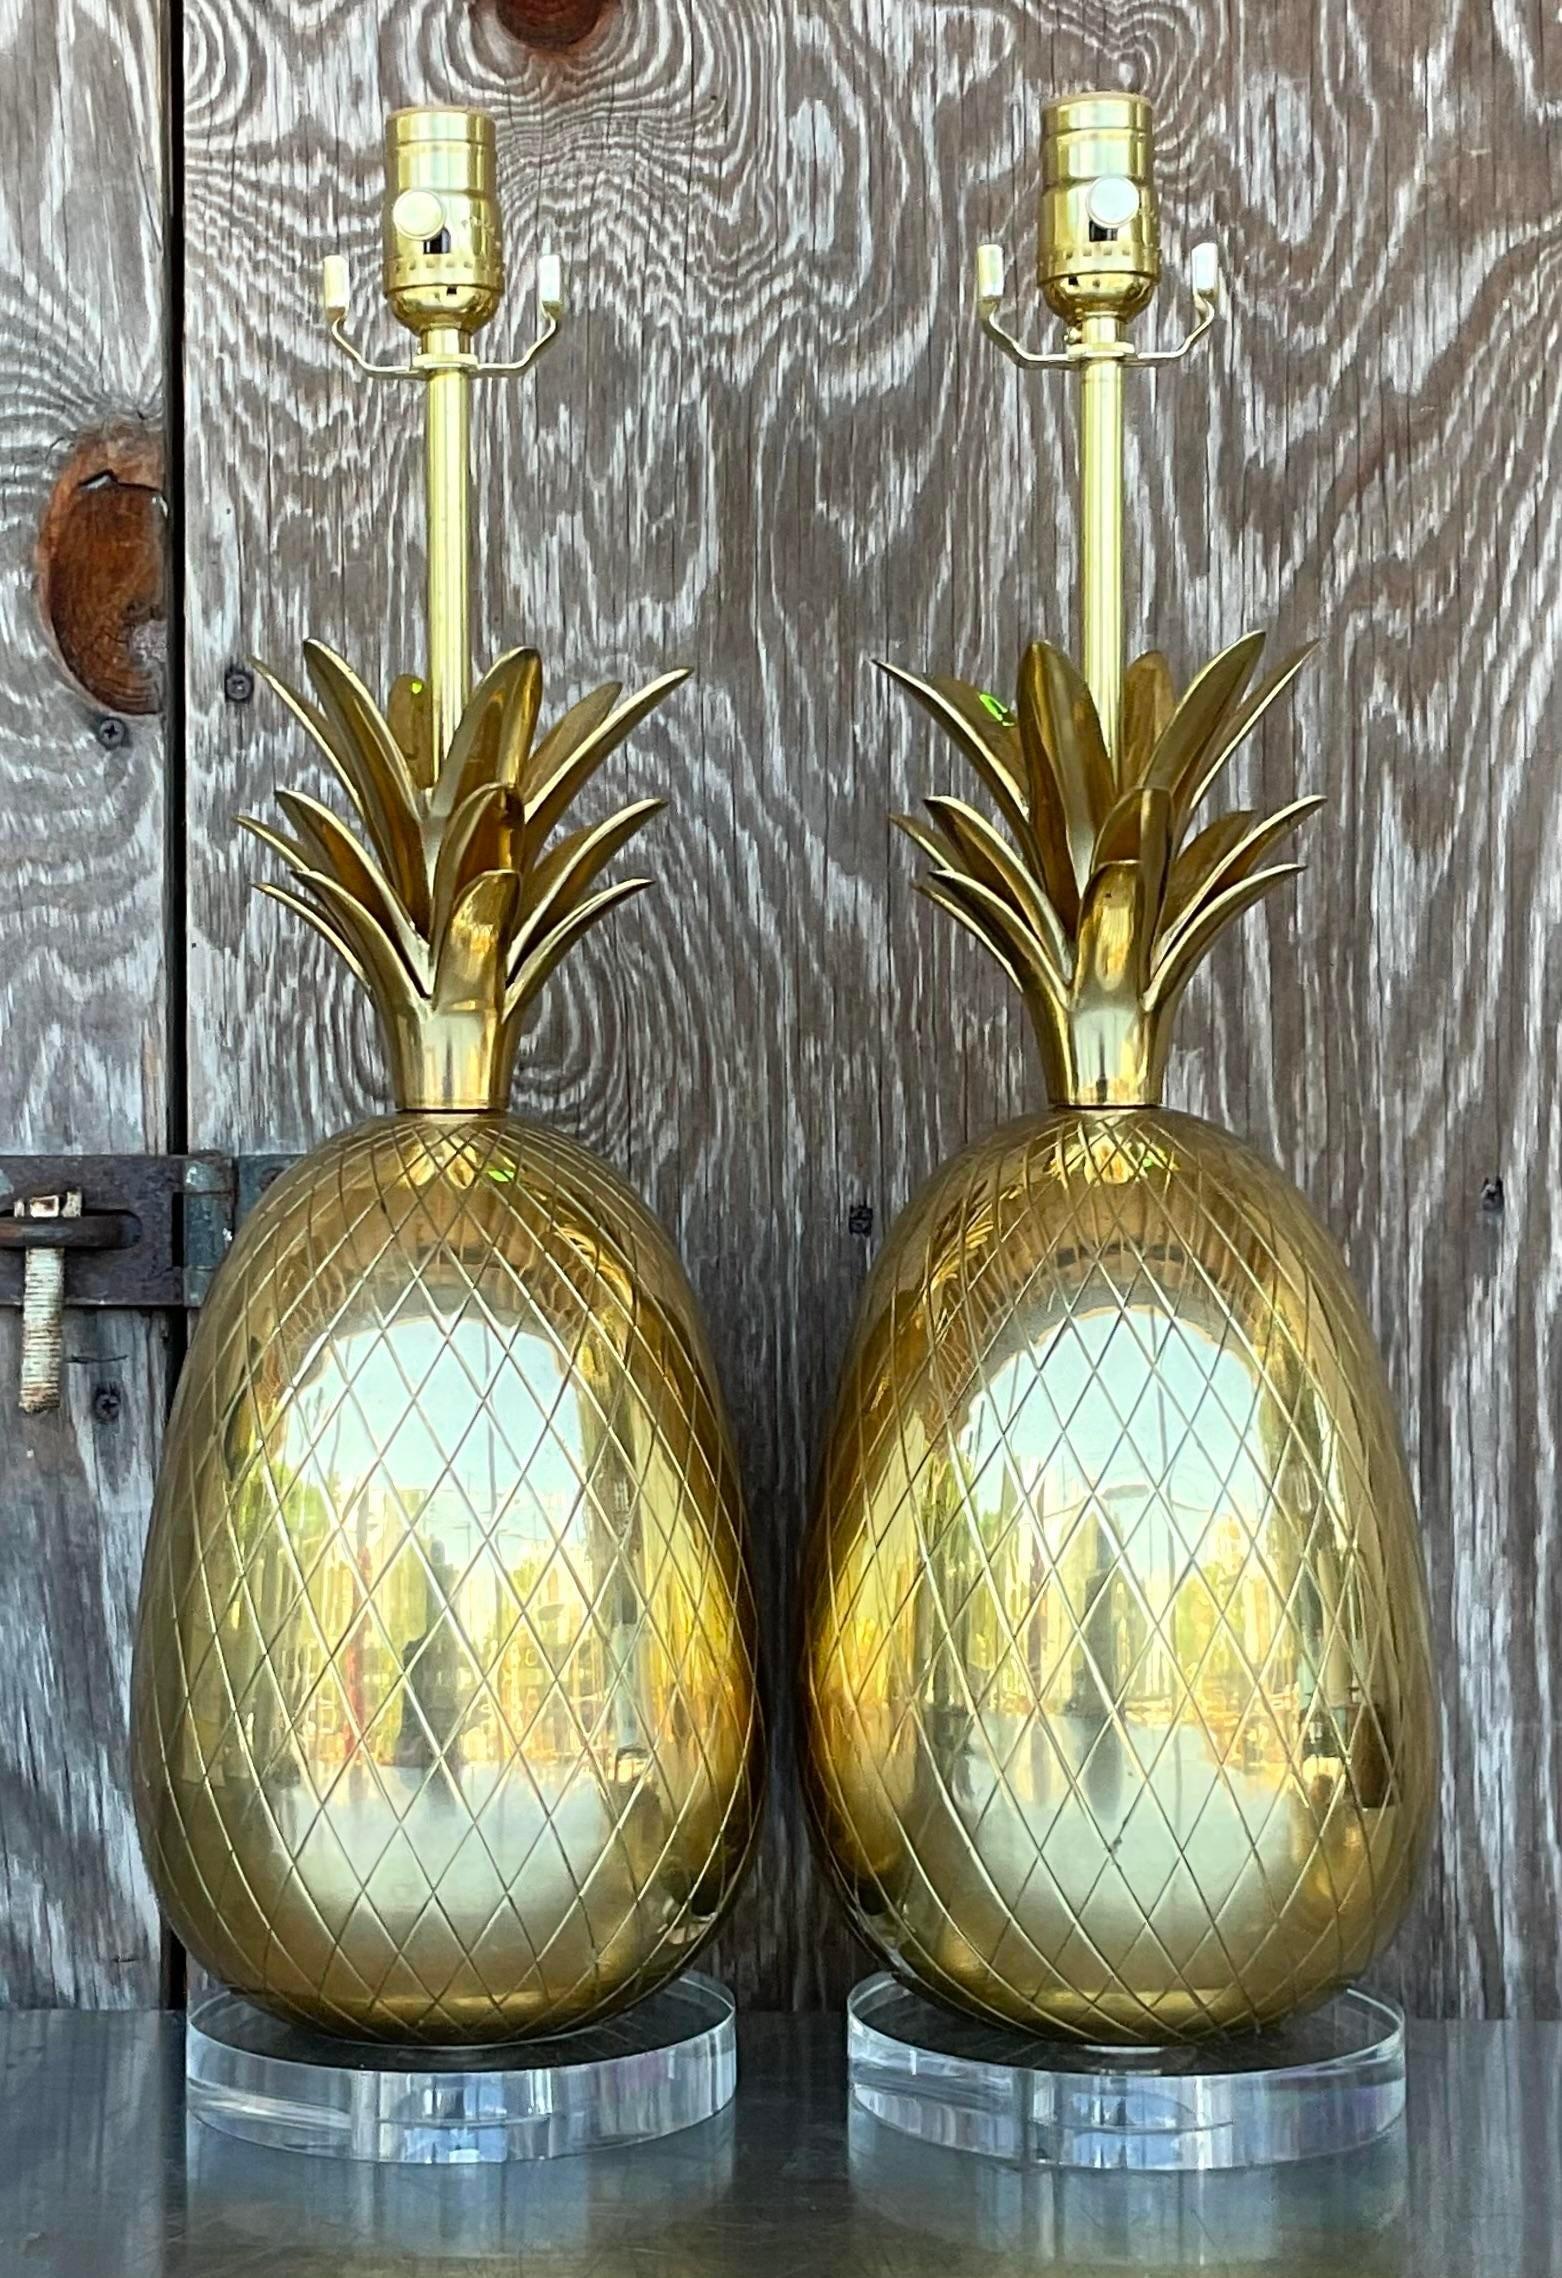 A sensational pair of vintage Regency table lamps. A chic pair of brass pineapples on lucite plinths. Fully restored with all new wiring and hardware. Acquired from a Palm Beach estate.